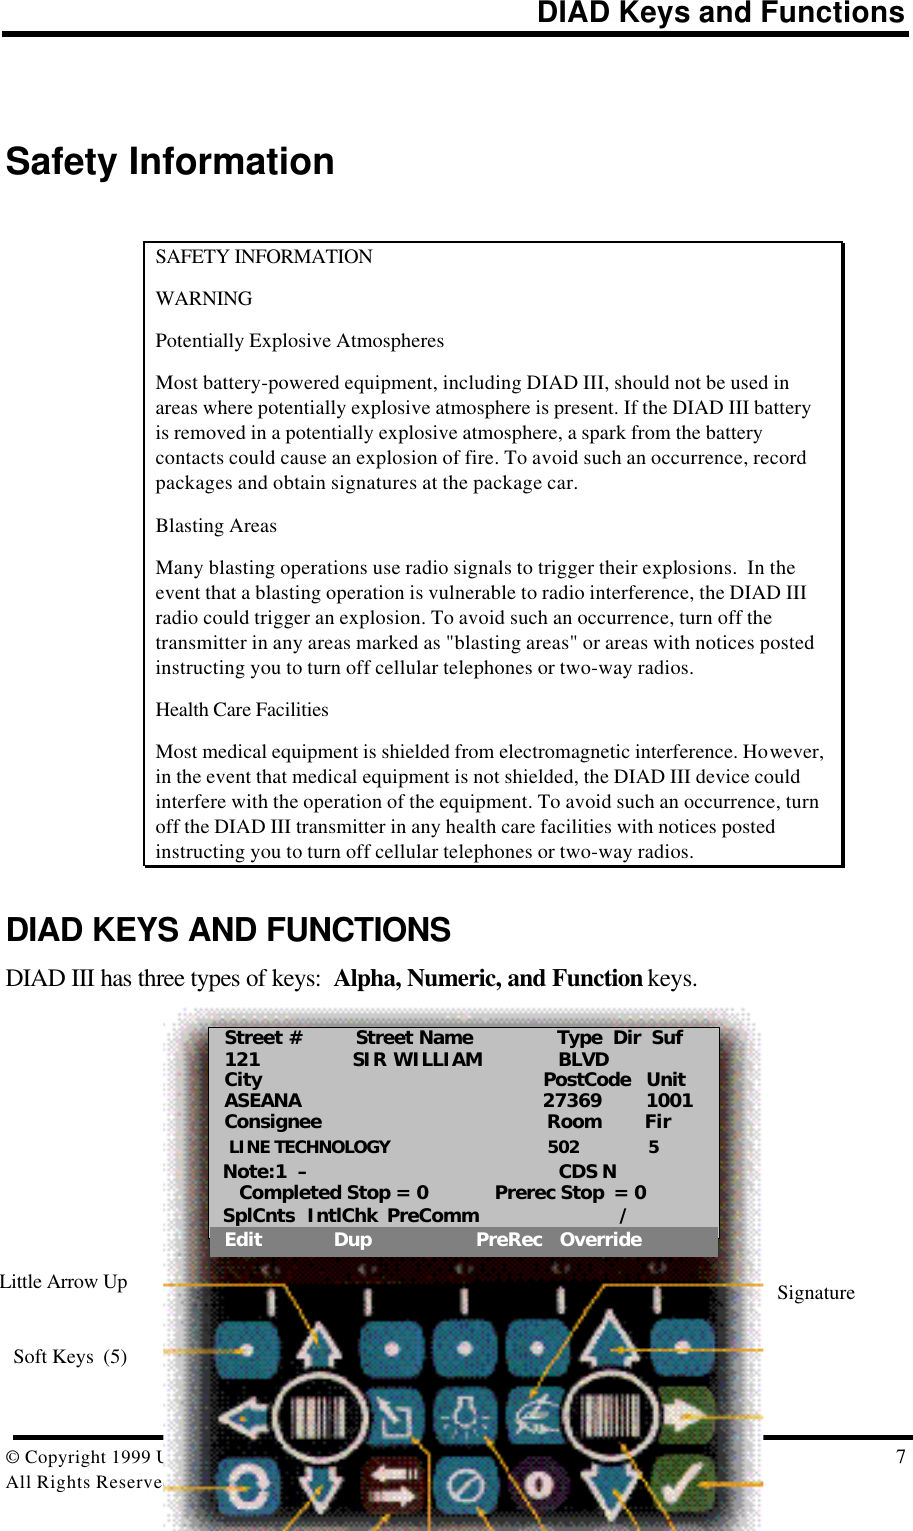 DIAD Keys and Functions© Copyright 1999 United Parcel Service of America, Inc.  7All Rights Reserved.Safety InformationSAFETY INFORMATIONWARNINGPotentially Explosive AtmospheresMost battery-powered equipment, including DIAD III, should not be used inareas where potentially explosive atmosphere is present. If the DIAD III batteryis removed in a potentially explosive atmosphere, a spark from the batterycontacts could cause an explosion of fire. To avoid such an occurrence, recordpackages and obtain signatures at the package car.Blasting AreasMany blasting operations use radio signals to trigger their explosions.  In theevent that a blasting operation is vulnerable to radio interference, the DIAD IIIradio could trigger an explosion. To avoid such an occurrence, turn off thetransmitter in any areas marked as &quot;blasting areas&quot; or areas with notices postedinstructing you to turn off cellular telephones or two-way radios.Health Care FacilitiesMost medical equipment is shielded from electromagnetic interference. However,in the event that medical equipment is not shielded, the DIAD III device couldinterfere with the operation of the equipment. To avoid such an occurrence, turnoff the DIAD III transmitter in any health care facilities with notices postedinstructing you to turn off cellular telephones or two-way radios.DIAD KEYS AND FUNCTIONSDIAD III has three types of keys:  Alpha, Numeric, and Function keys.SignatureSoft Keys  (5)Little Arrow UpStreet #     Street Name       Type  Dir  Suf121   SIR WILLIAM              BLVDCity                  PostCode   UnitASEANA                  27369        1001Consignee                            Room        Fir LINE TECHNOLOGY                                502              5Note:1  –                               CDS N   Completed Stop = 0            Prerec Stop  = 0SplCnts  IntlChk  PreComm      /Edit             Dup                   PreRec   Override